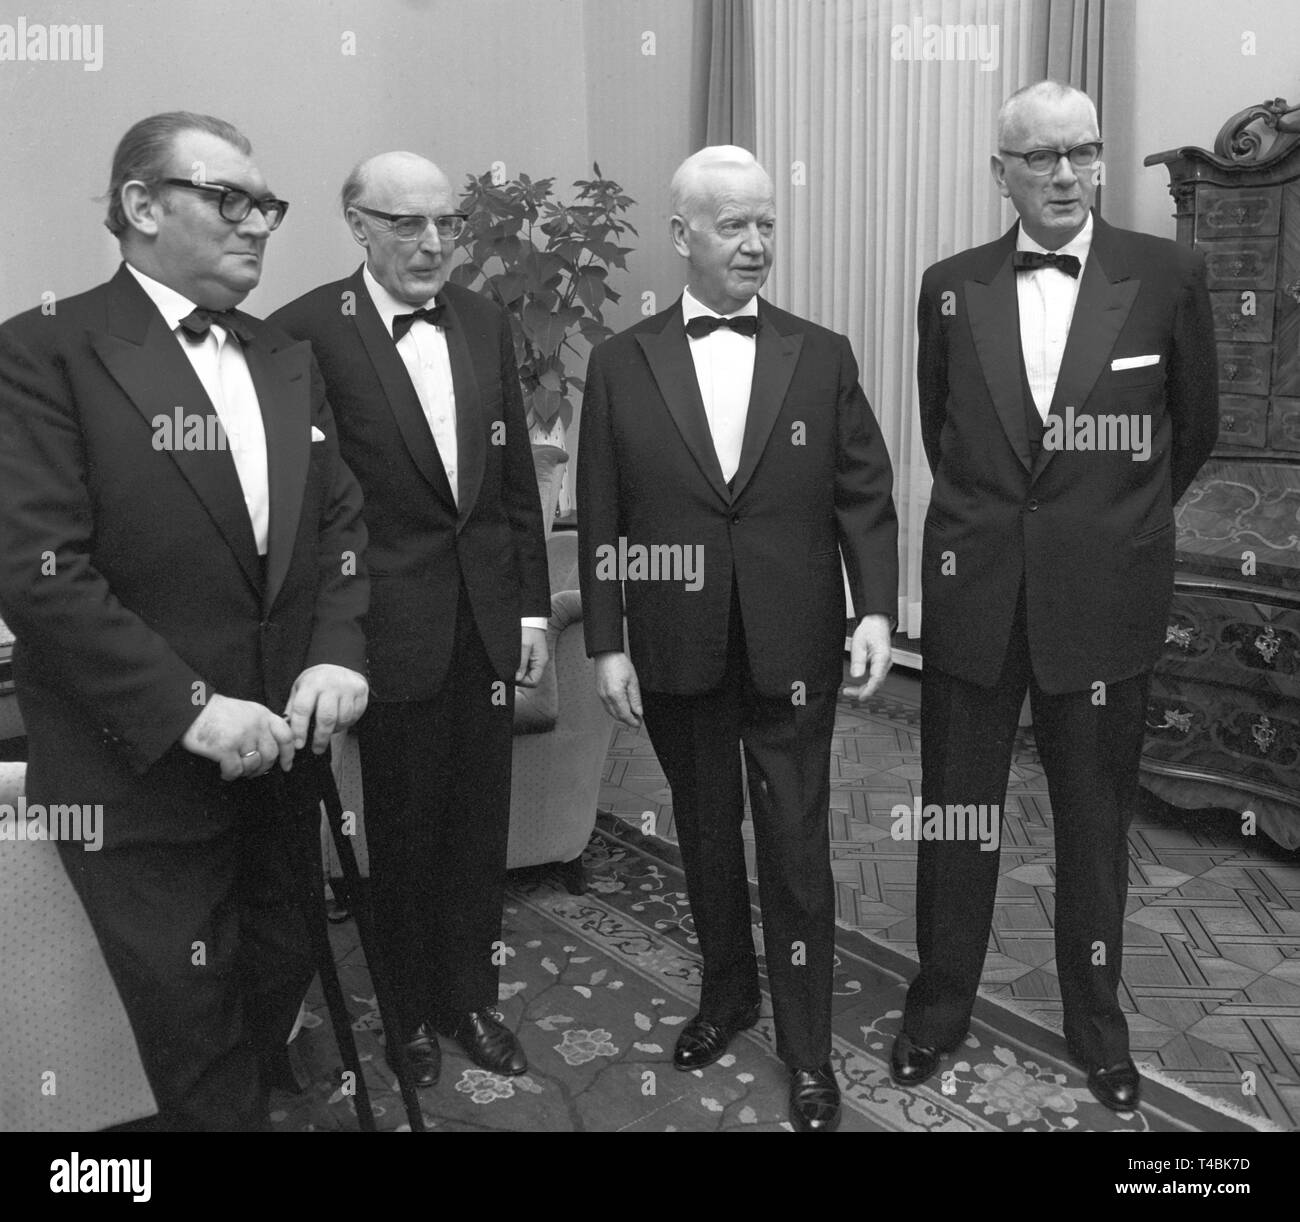 On 18 December 1963, the German president Heinrich Lübke (2nd from the right) welcomes the German chemist Professor Dr Karl Ziegler (right) and the German physician Professor Dr Hans Jensen (2nd from the left), who got the Nobel Prize this year. The federal minister of research, Hans Lenz (left), attended as well. | usage worldwide Stock Photo